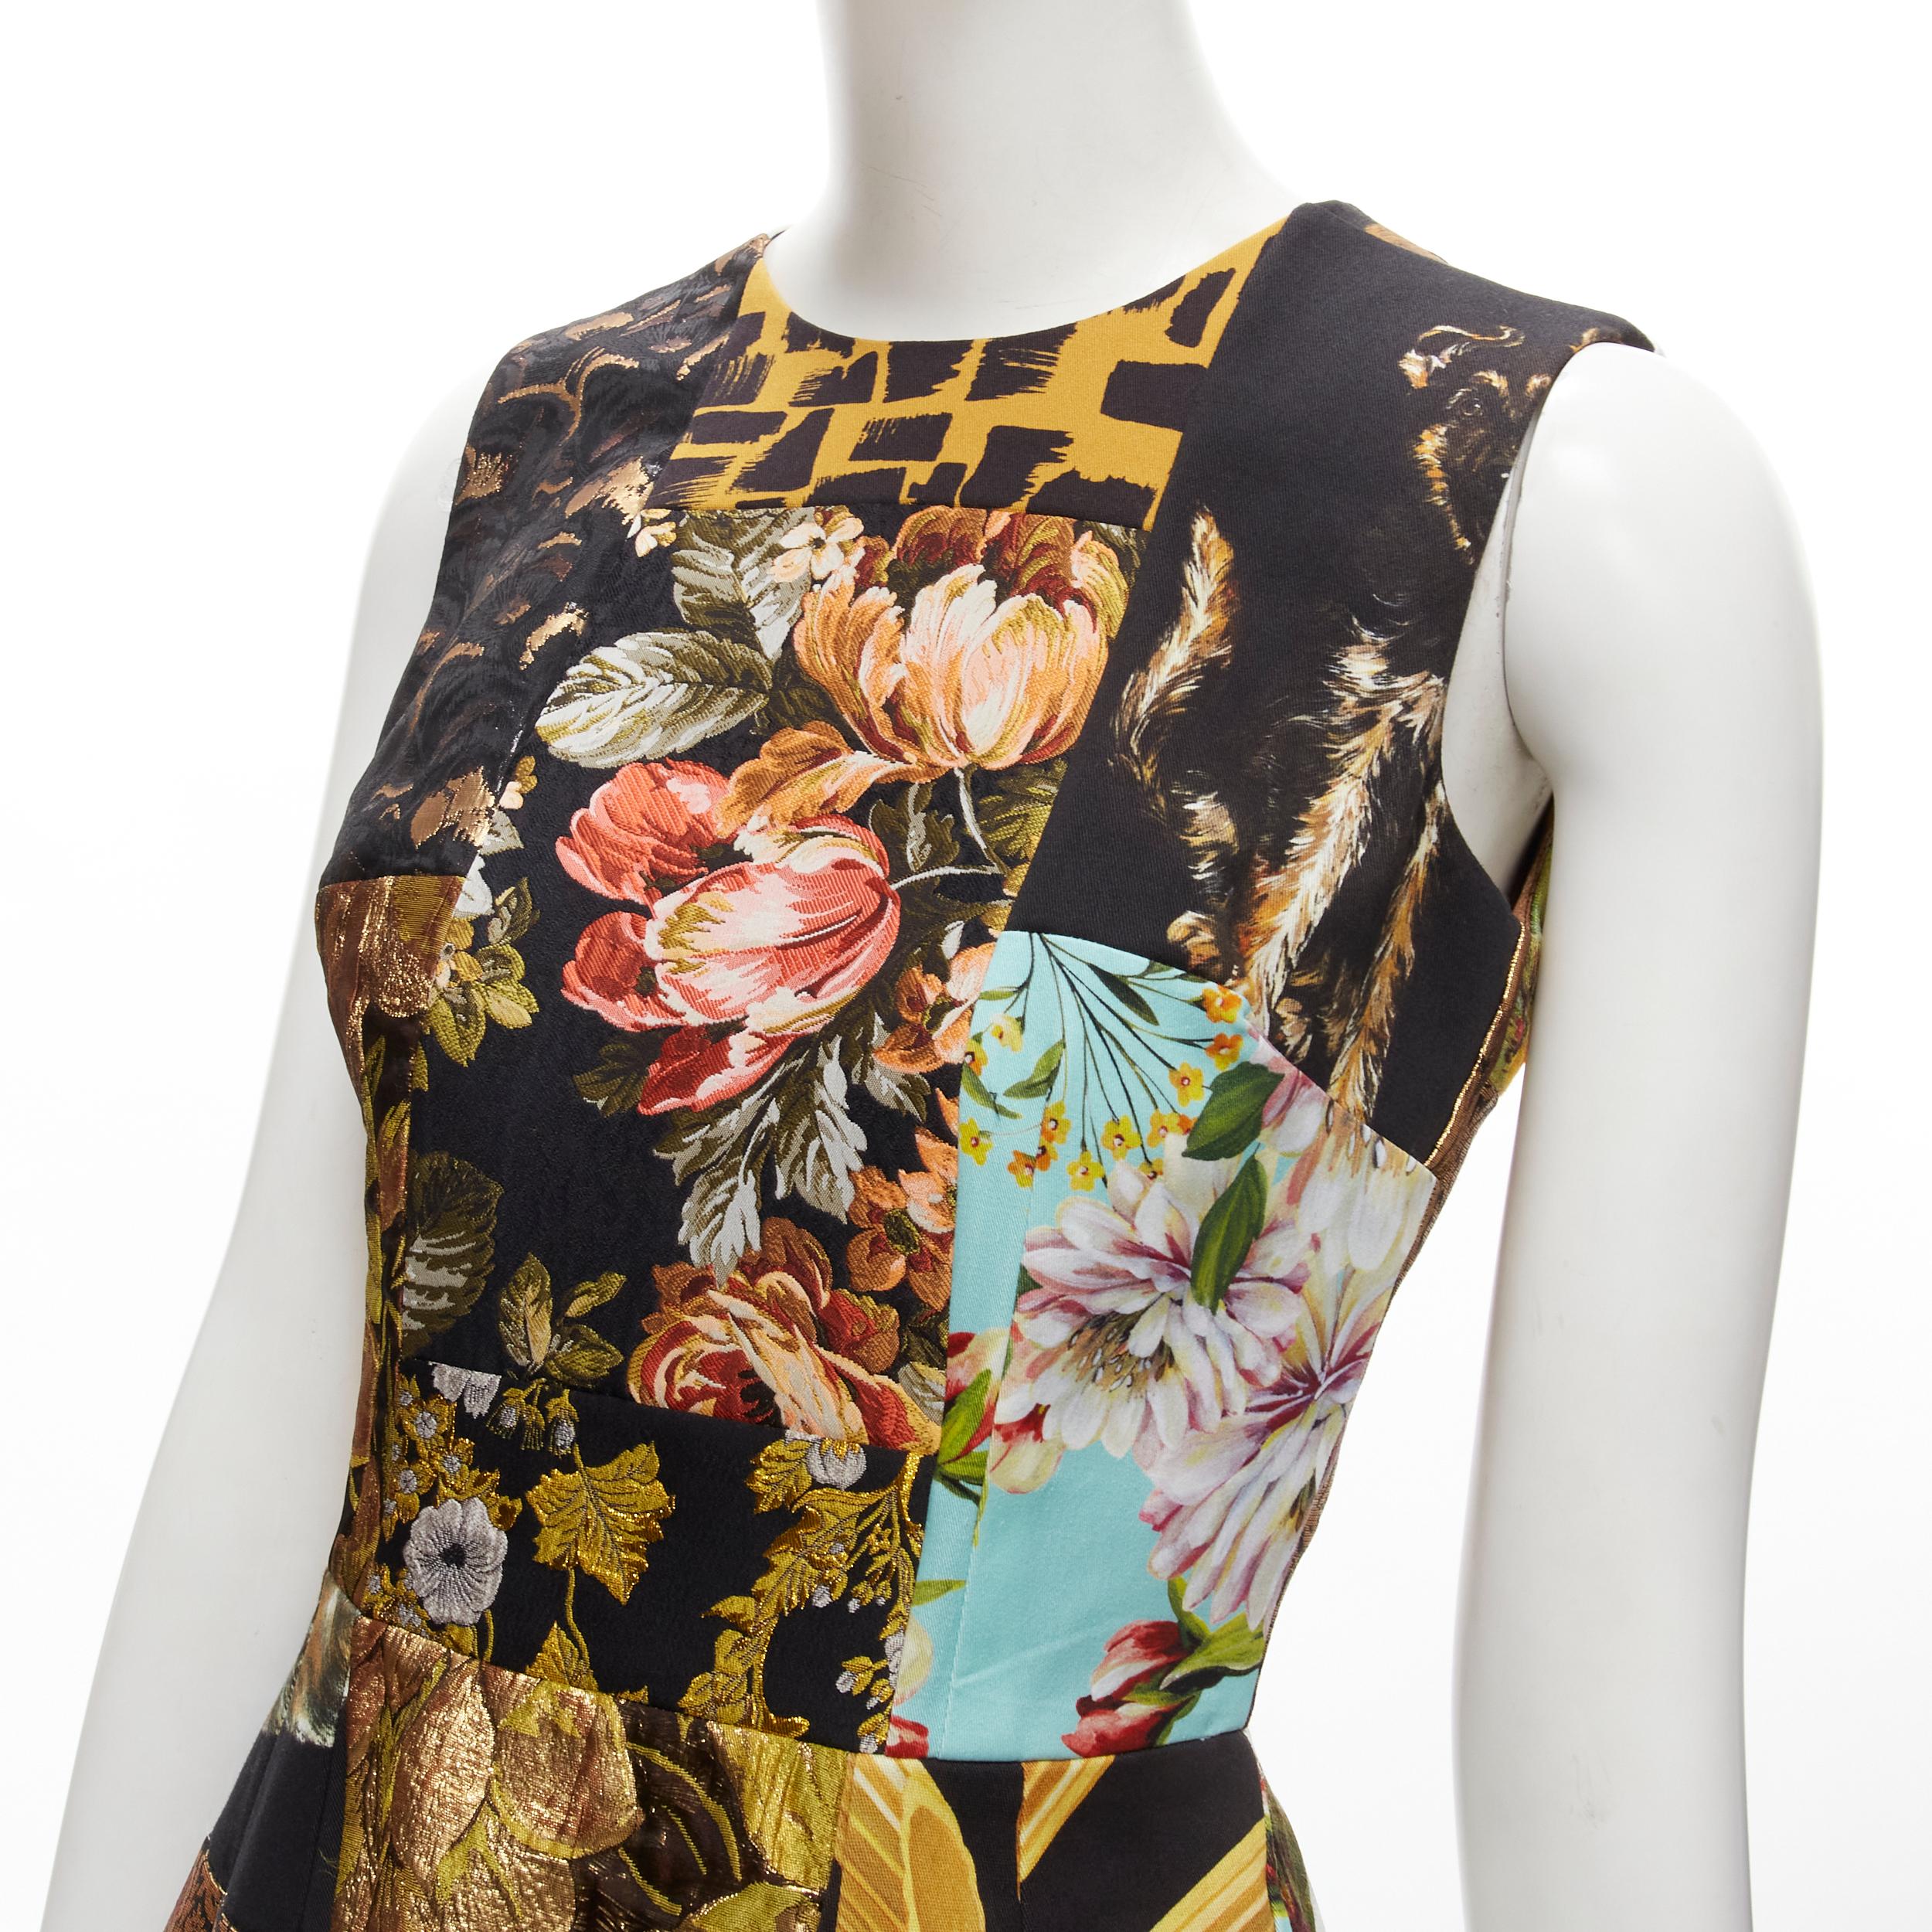 DOLCE GABBANA 2021 patchwork jacquard fabric panelled mini dress IT38 XS
Brand: Dolce Gabbana
Designer: Domenico Dolce and Stefano Gabbana
Collection: 2021 
Material: Mixed Materials
Color: Mixed
Pattern: Solid
Closure: Zip
Extra Detail: Mixed